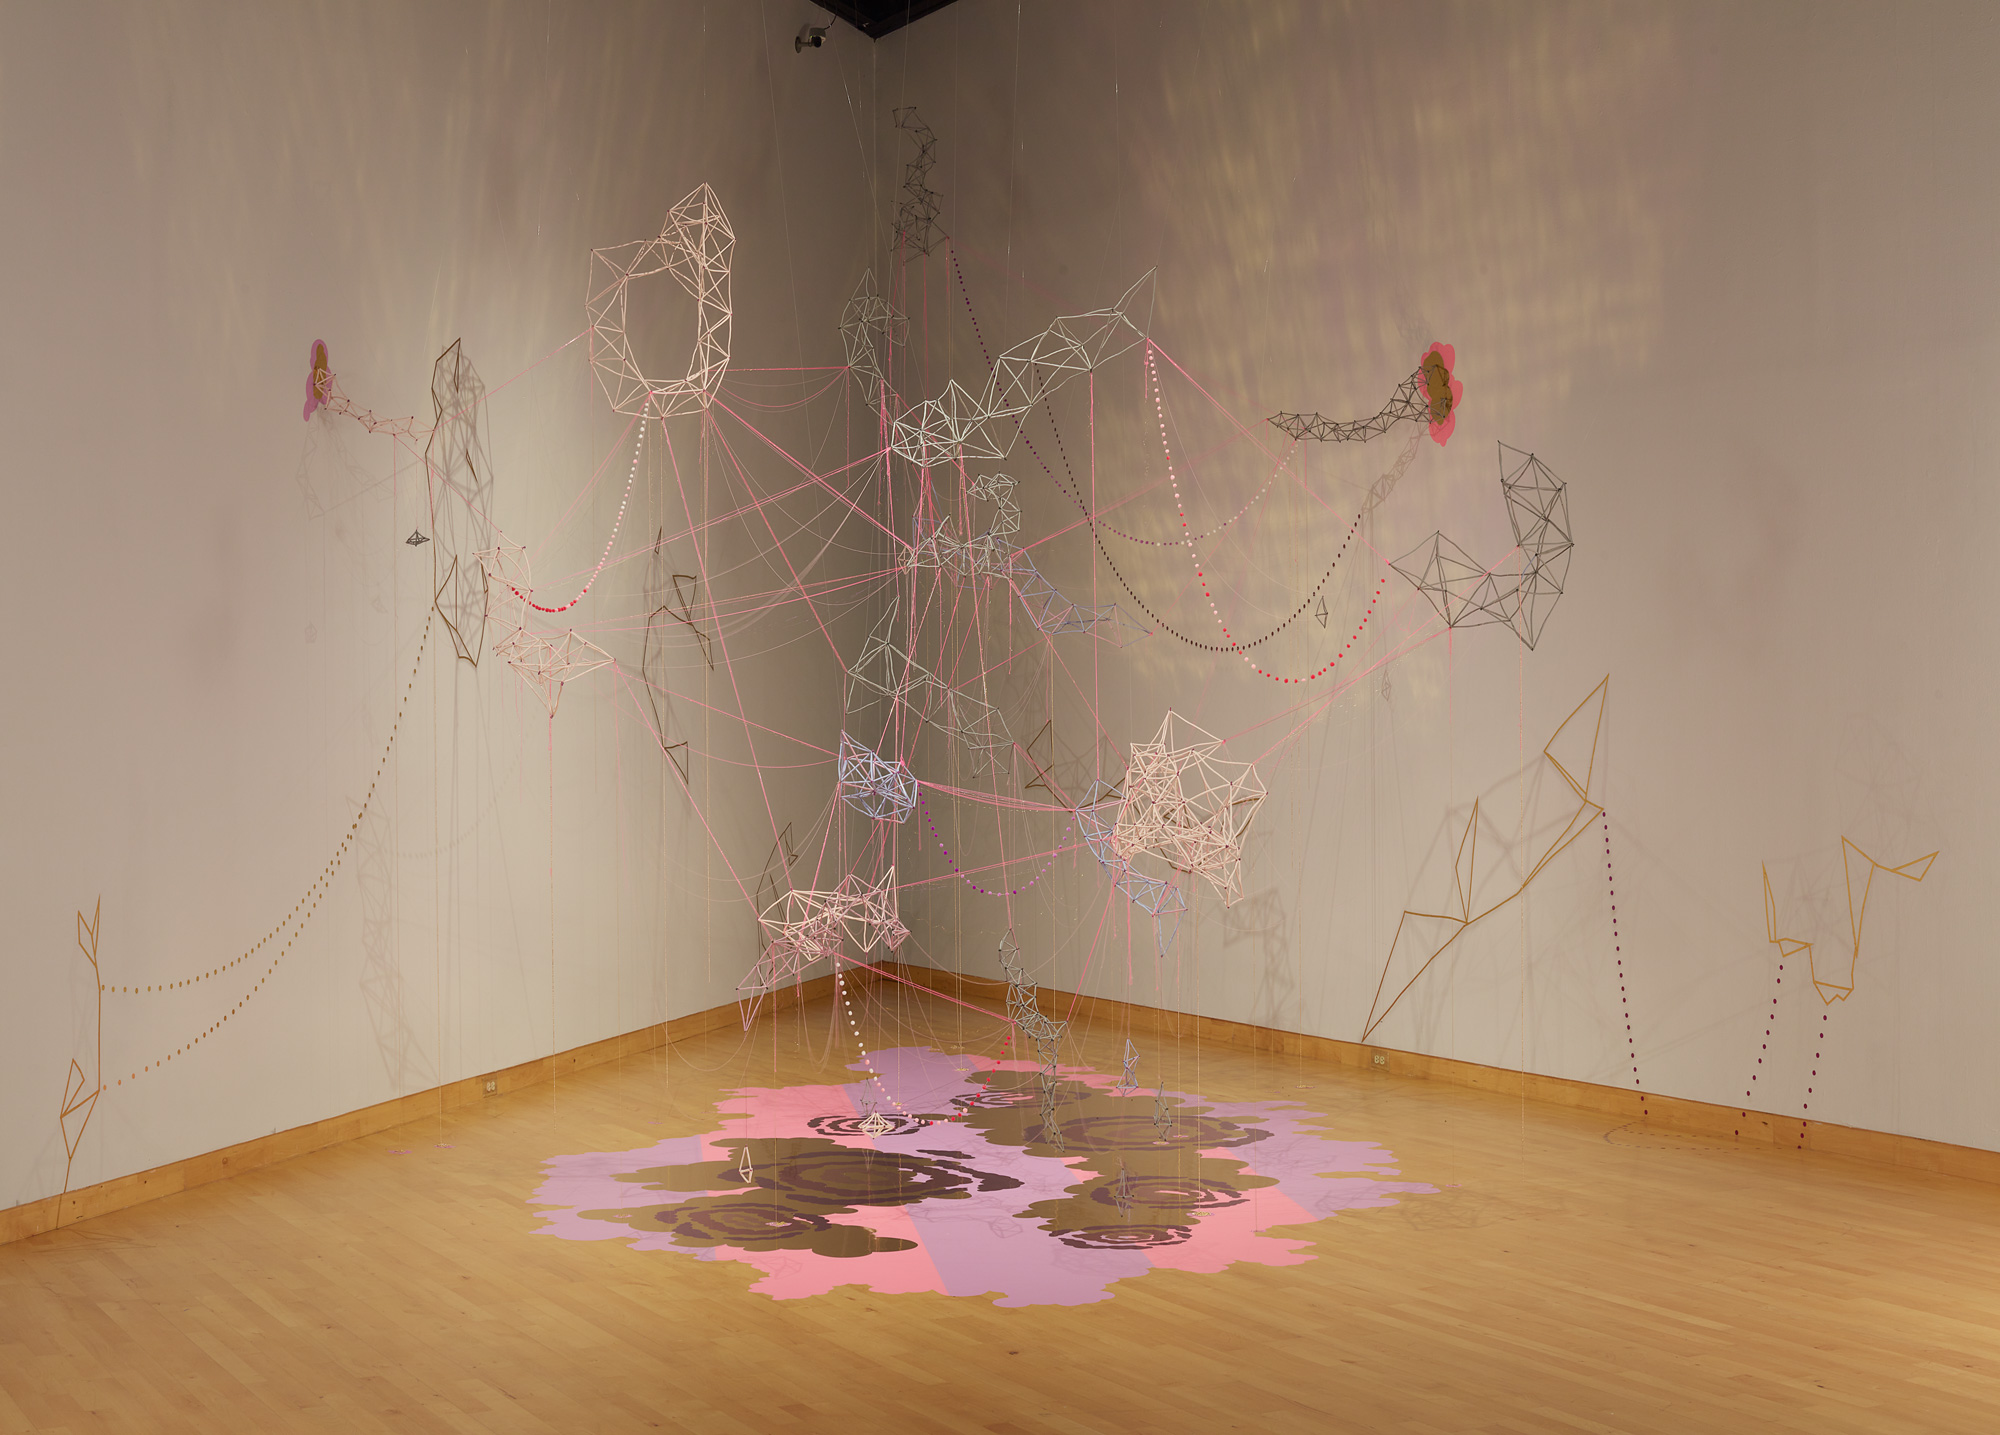 Casey McDonough, the immeasurability of this cosmological collider, 2021. ceramic and mixed media. dimensions variable. Courtesy of the artist. Installation view of Skyway 20/21 exhibition at USF Contemporary Art Museum. Photo: Will Lytch.